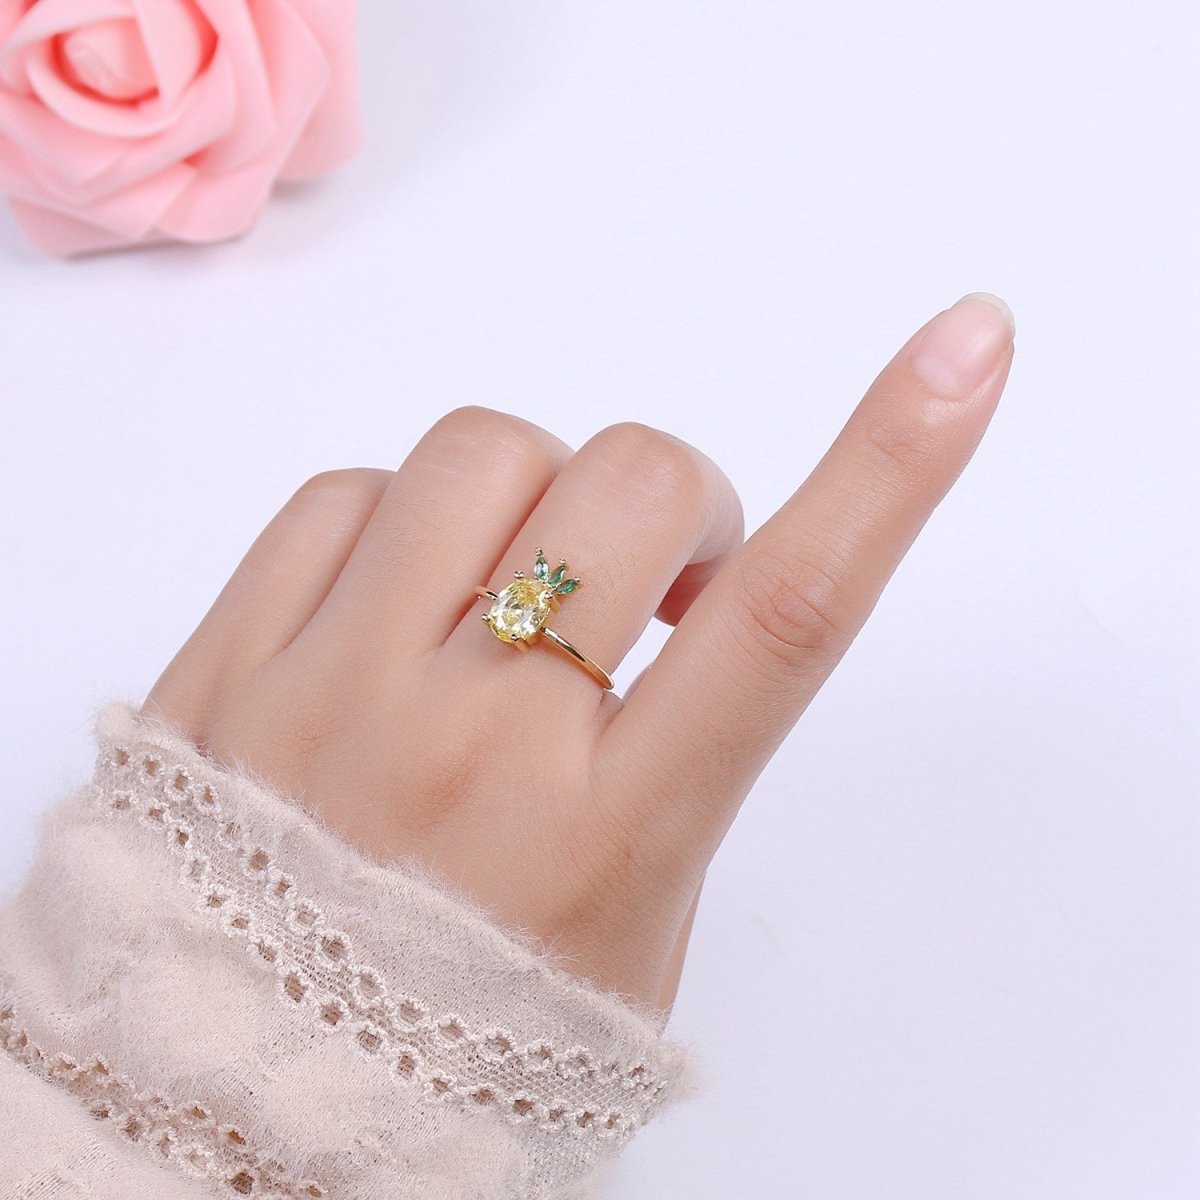 Dainty Dole Pineapple CZ Gold Band Adjustable Ring S-217 - DLUXCA